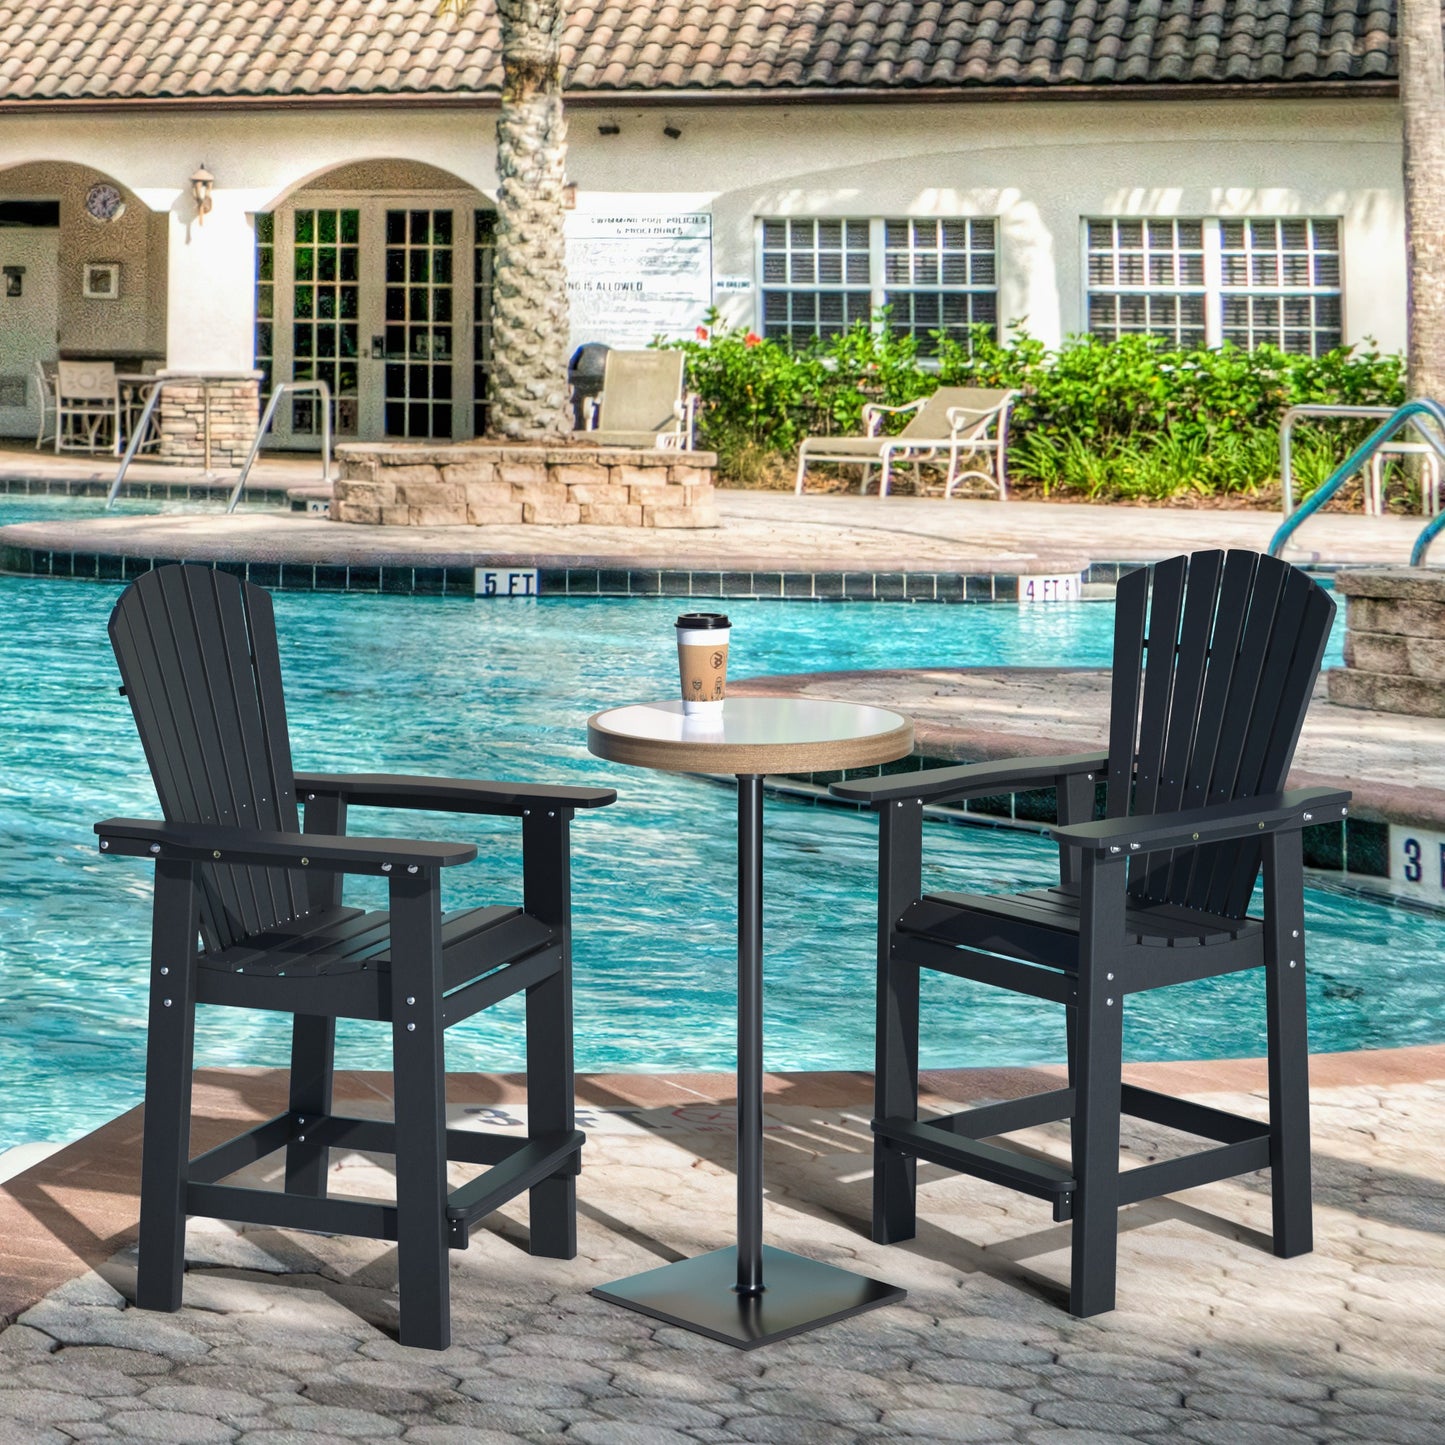 Patio Bar Stools Adirondack Arm Chairs Set of 2, All Weather Outdoor Furniture Wood-Like HDPE Deck Backyard Garden Dining Chairs, Beach Balcony Chair Barstool with Removable Table